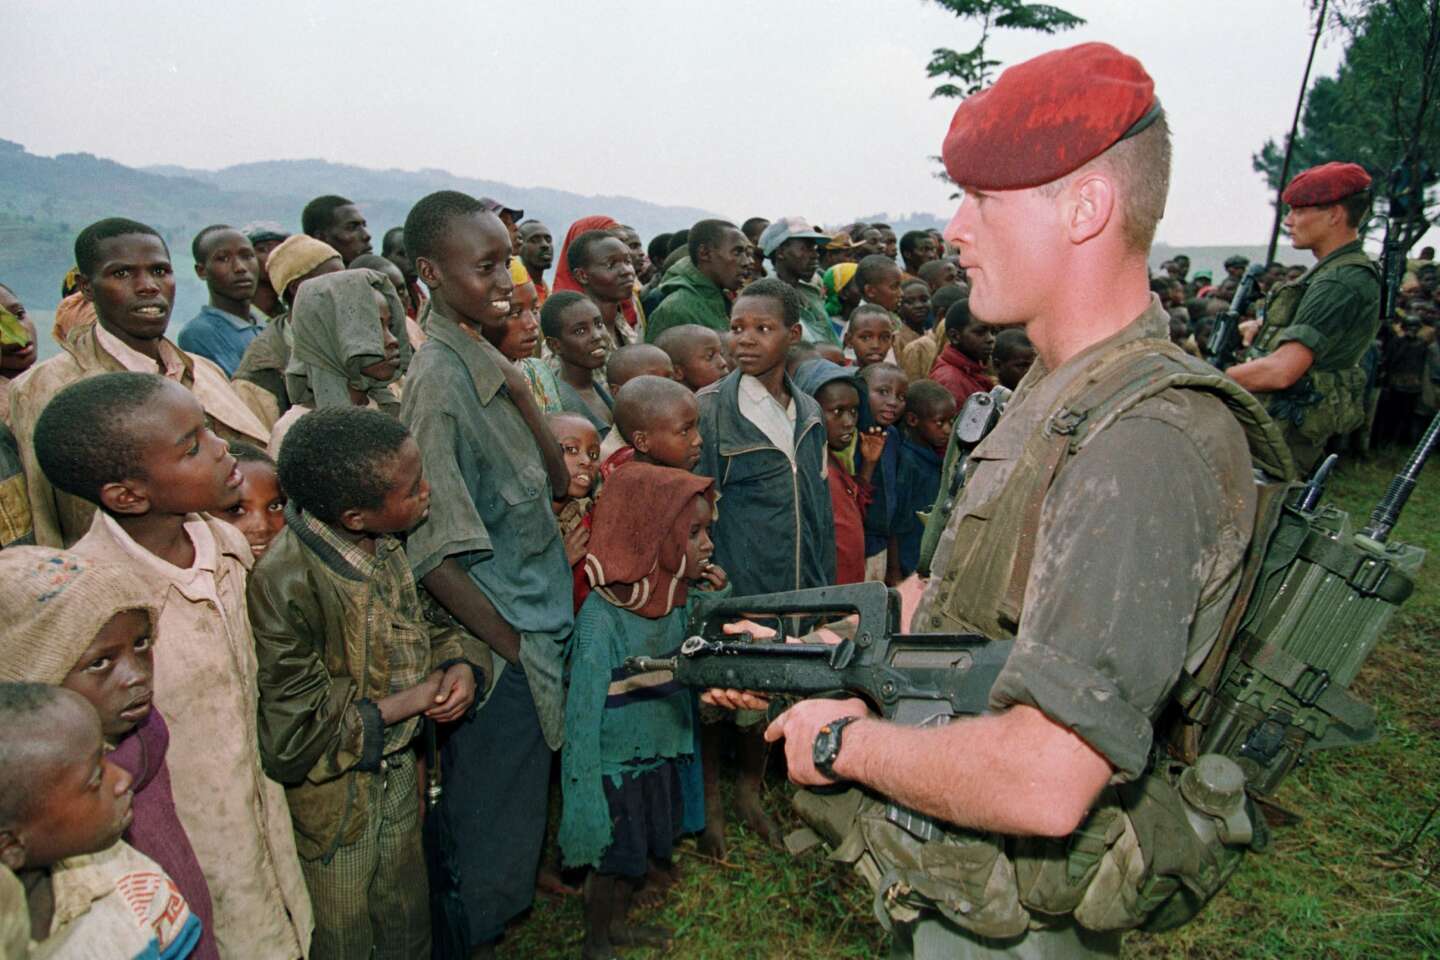 Before the Paris court, the sensitive issue of arms sales by France to Hutu extremists in 1994